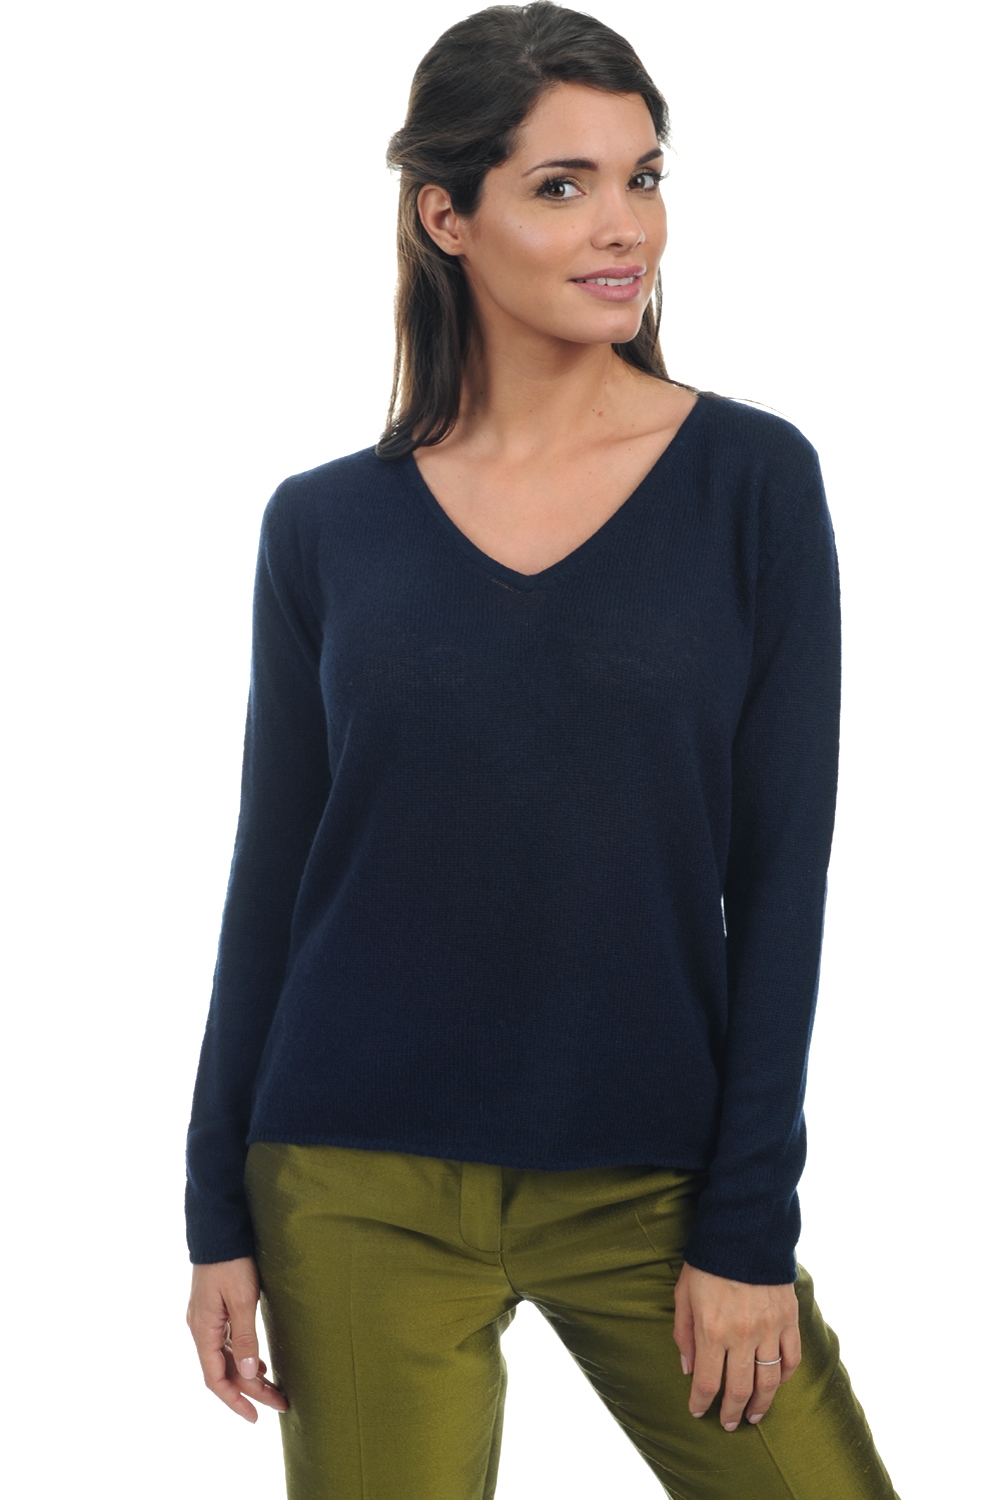 Cashmere ladies basic sweaters at low prices flavie dress blue 4xl